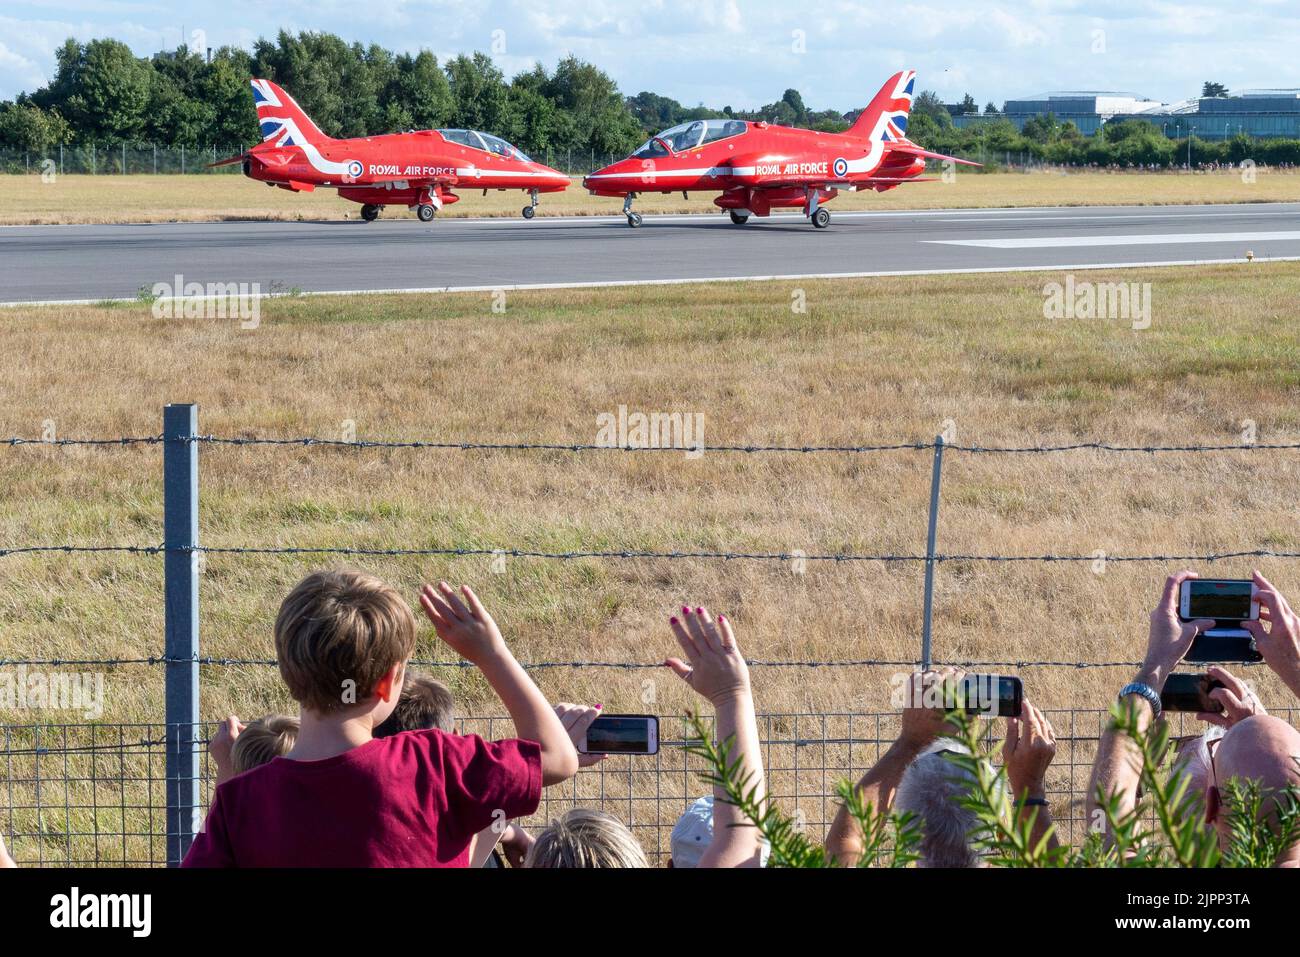 London Southend Airport, Essex, UK. 19th Aug, 2022. The RAF’s Red Arrows are using the civilian airport to operate from for this weekend’s airshows at Eastbourne and Folkestone. The Red Arrows have arrived this evening, arriving in their famous arrow formation before breaking to land. Many people have come out to see them, lining the fences Stock Photo